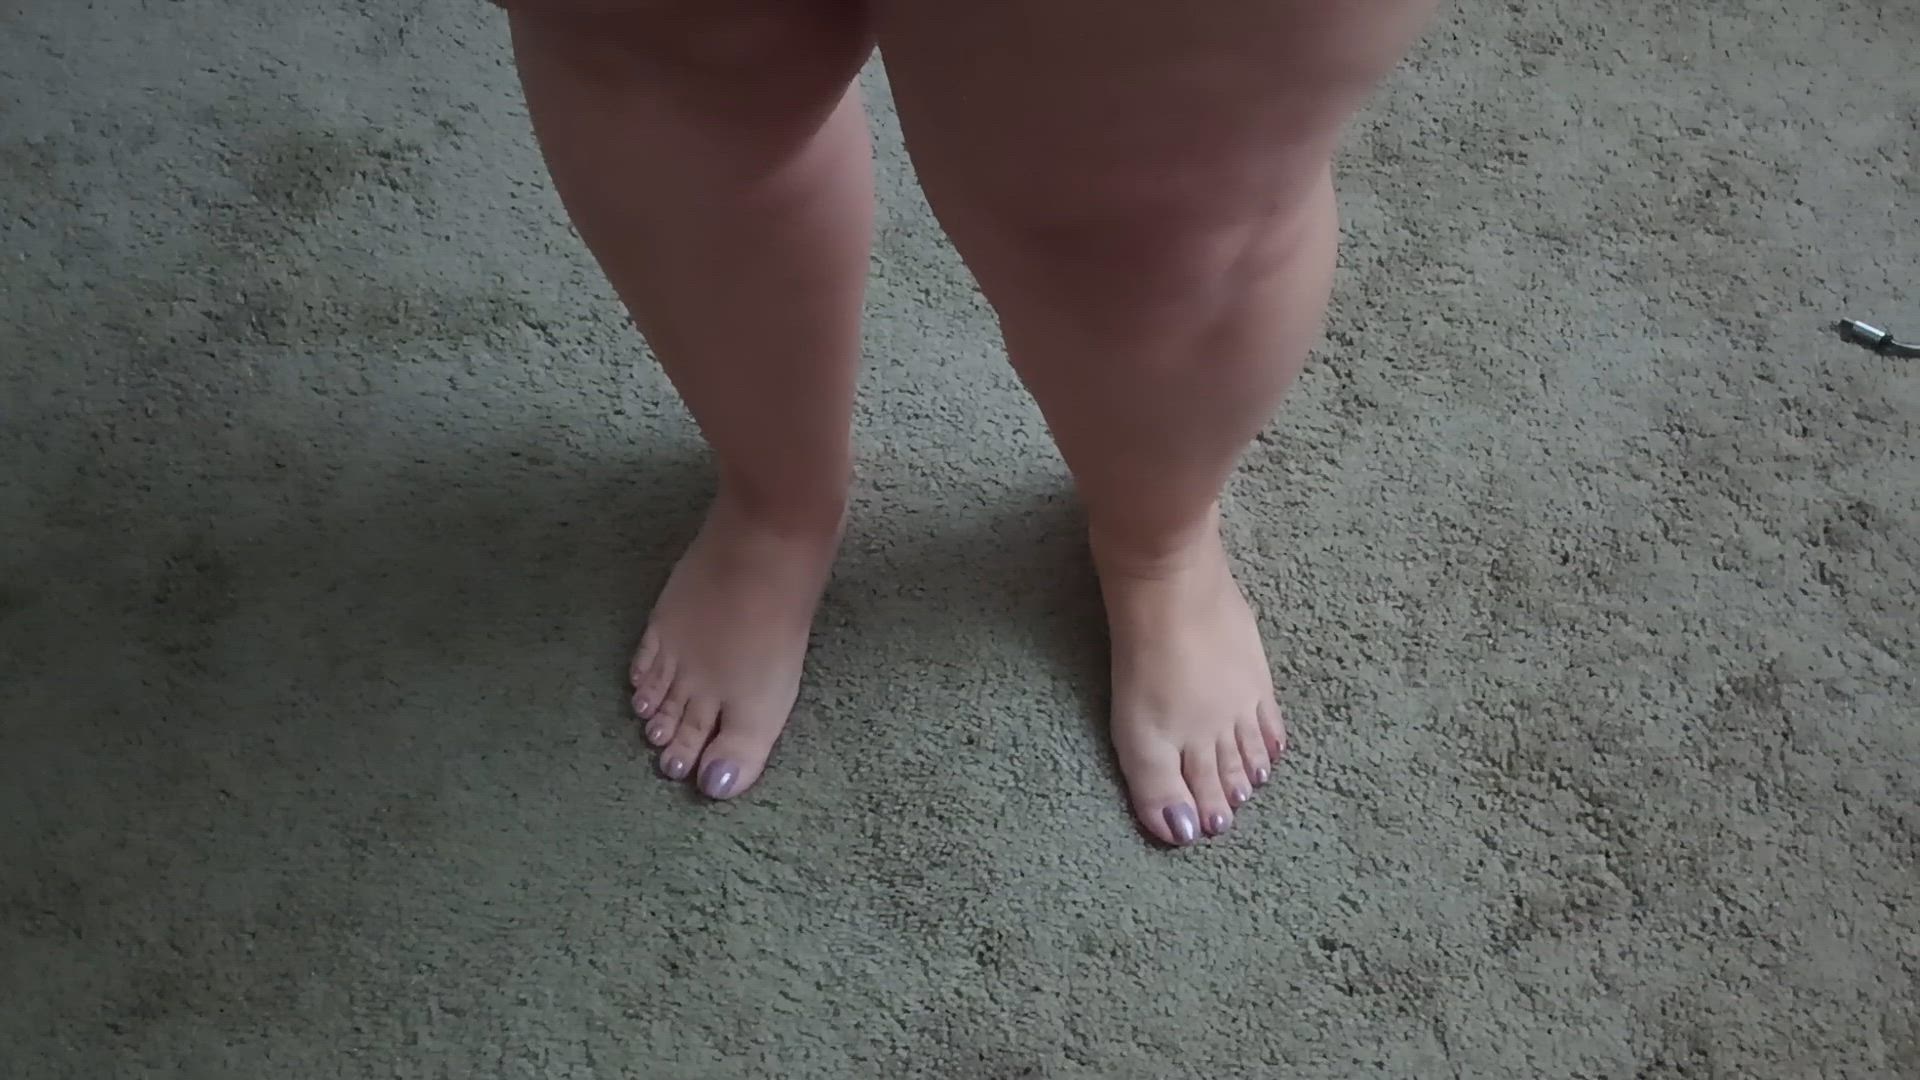 Amateur porn video with onlyfans model queenmandy <strong>@queenmandysfeet</strong>